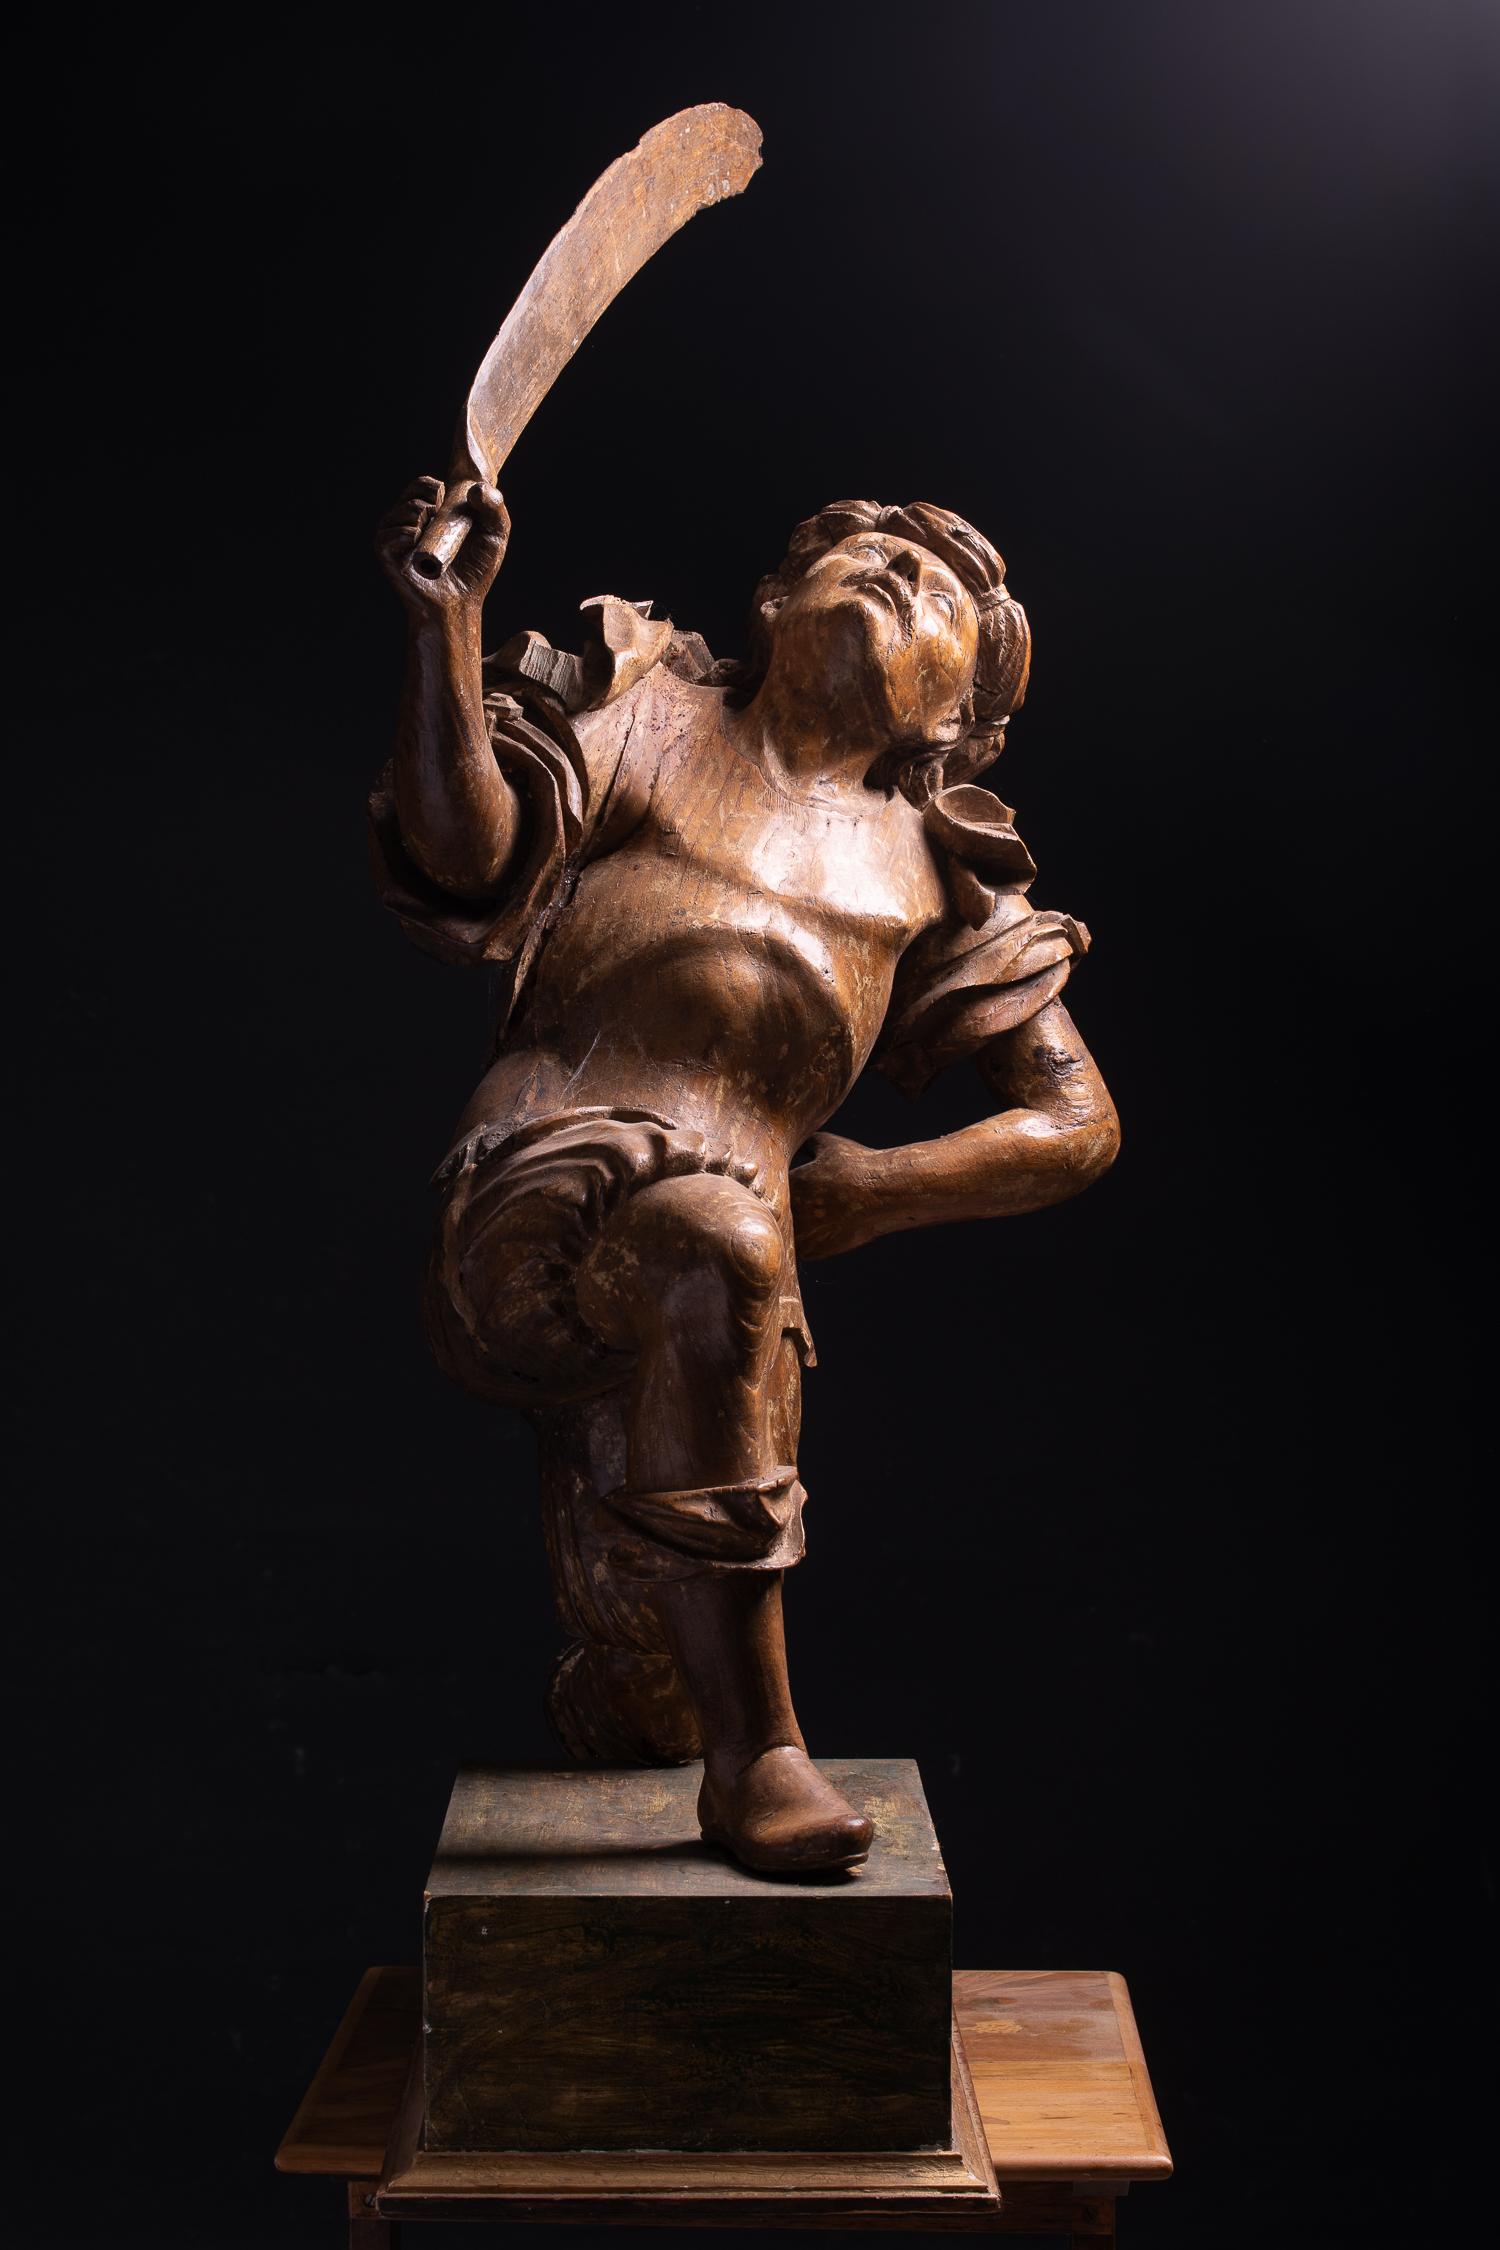 In the period that this sculpture group was carved, there was a great interest in martial art in Europe, and especially in combat training with bladed weapons. Several books on the art of fencing were published the throughout 16th century. One of